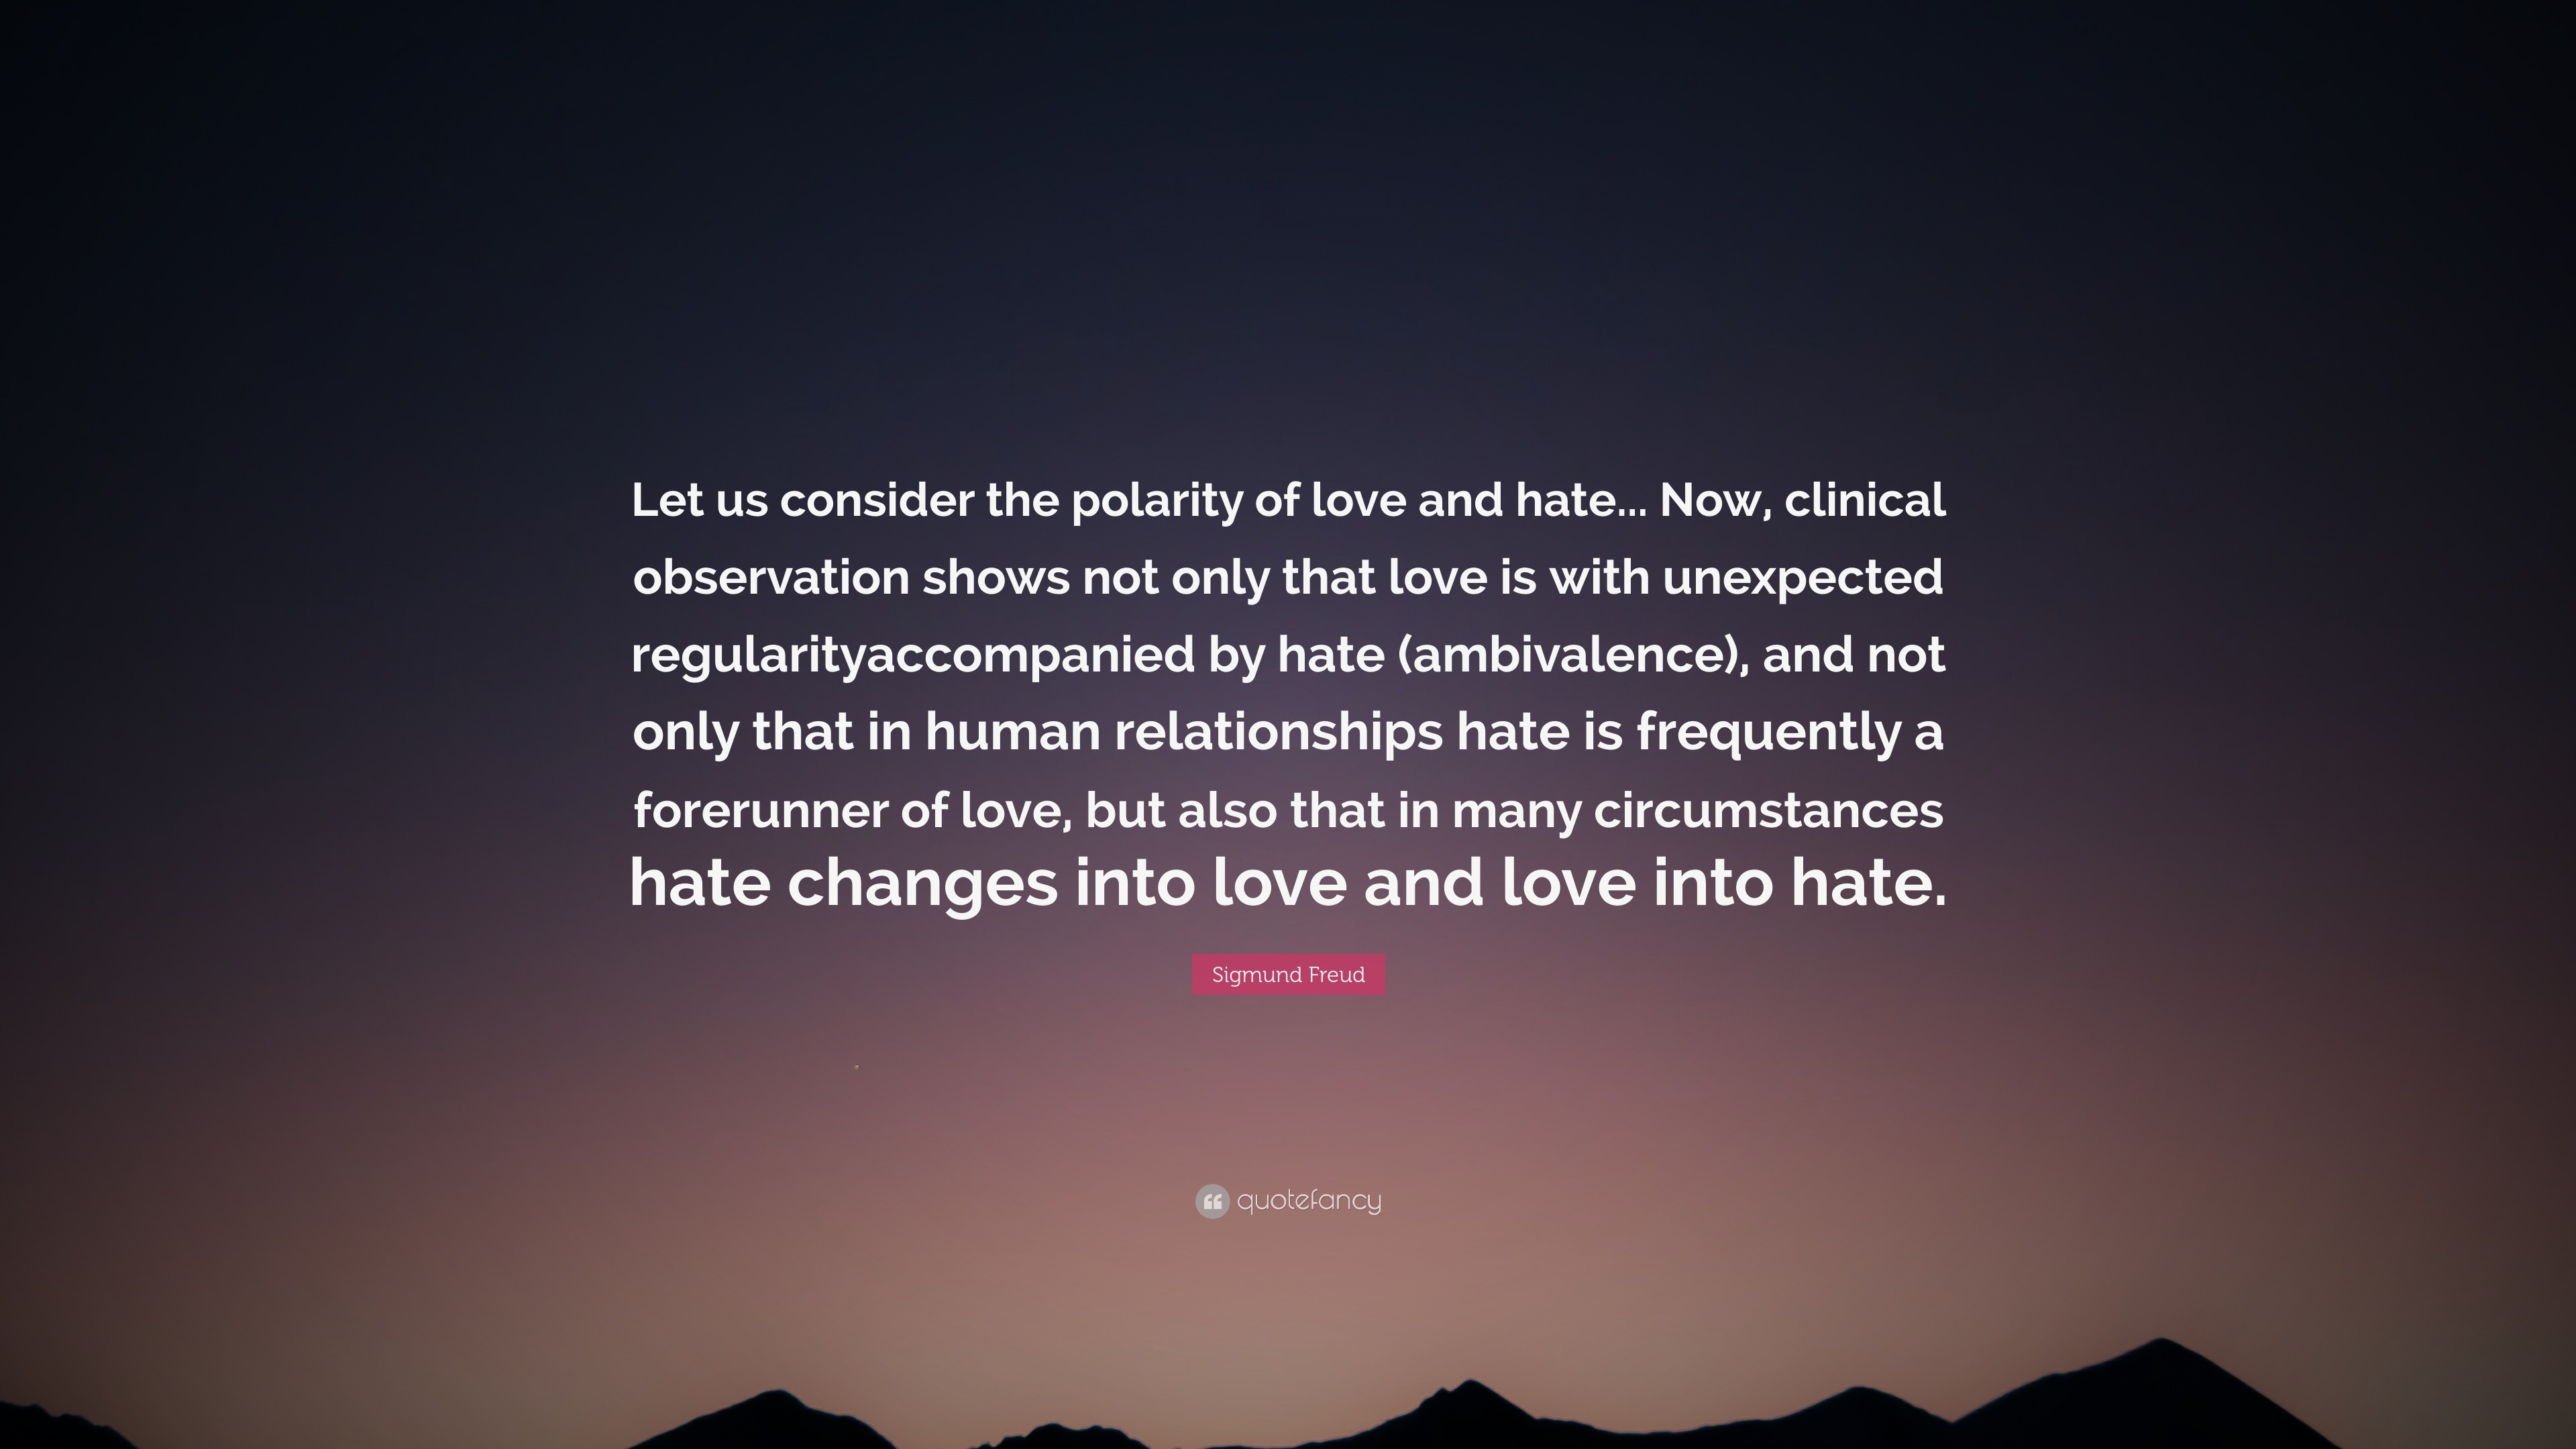 Sigmund Freud Quote “Let us consider the polarity of love and hate